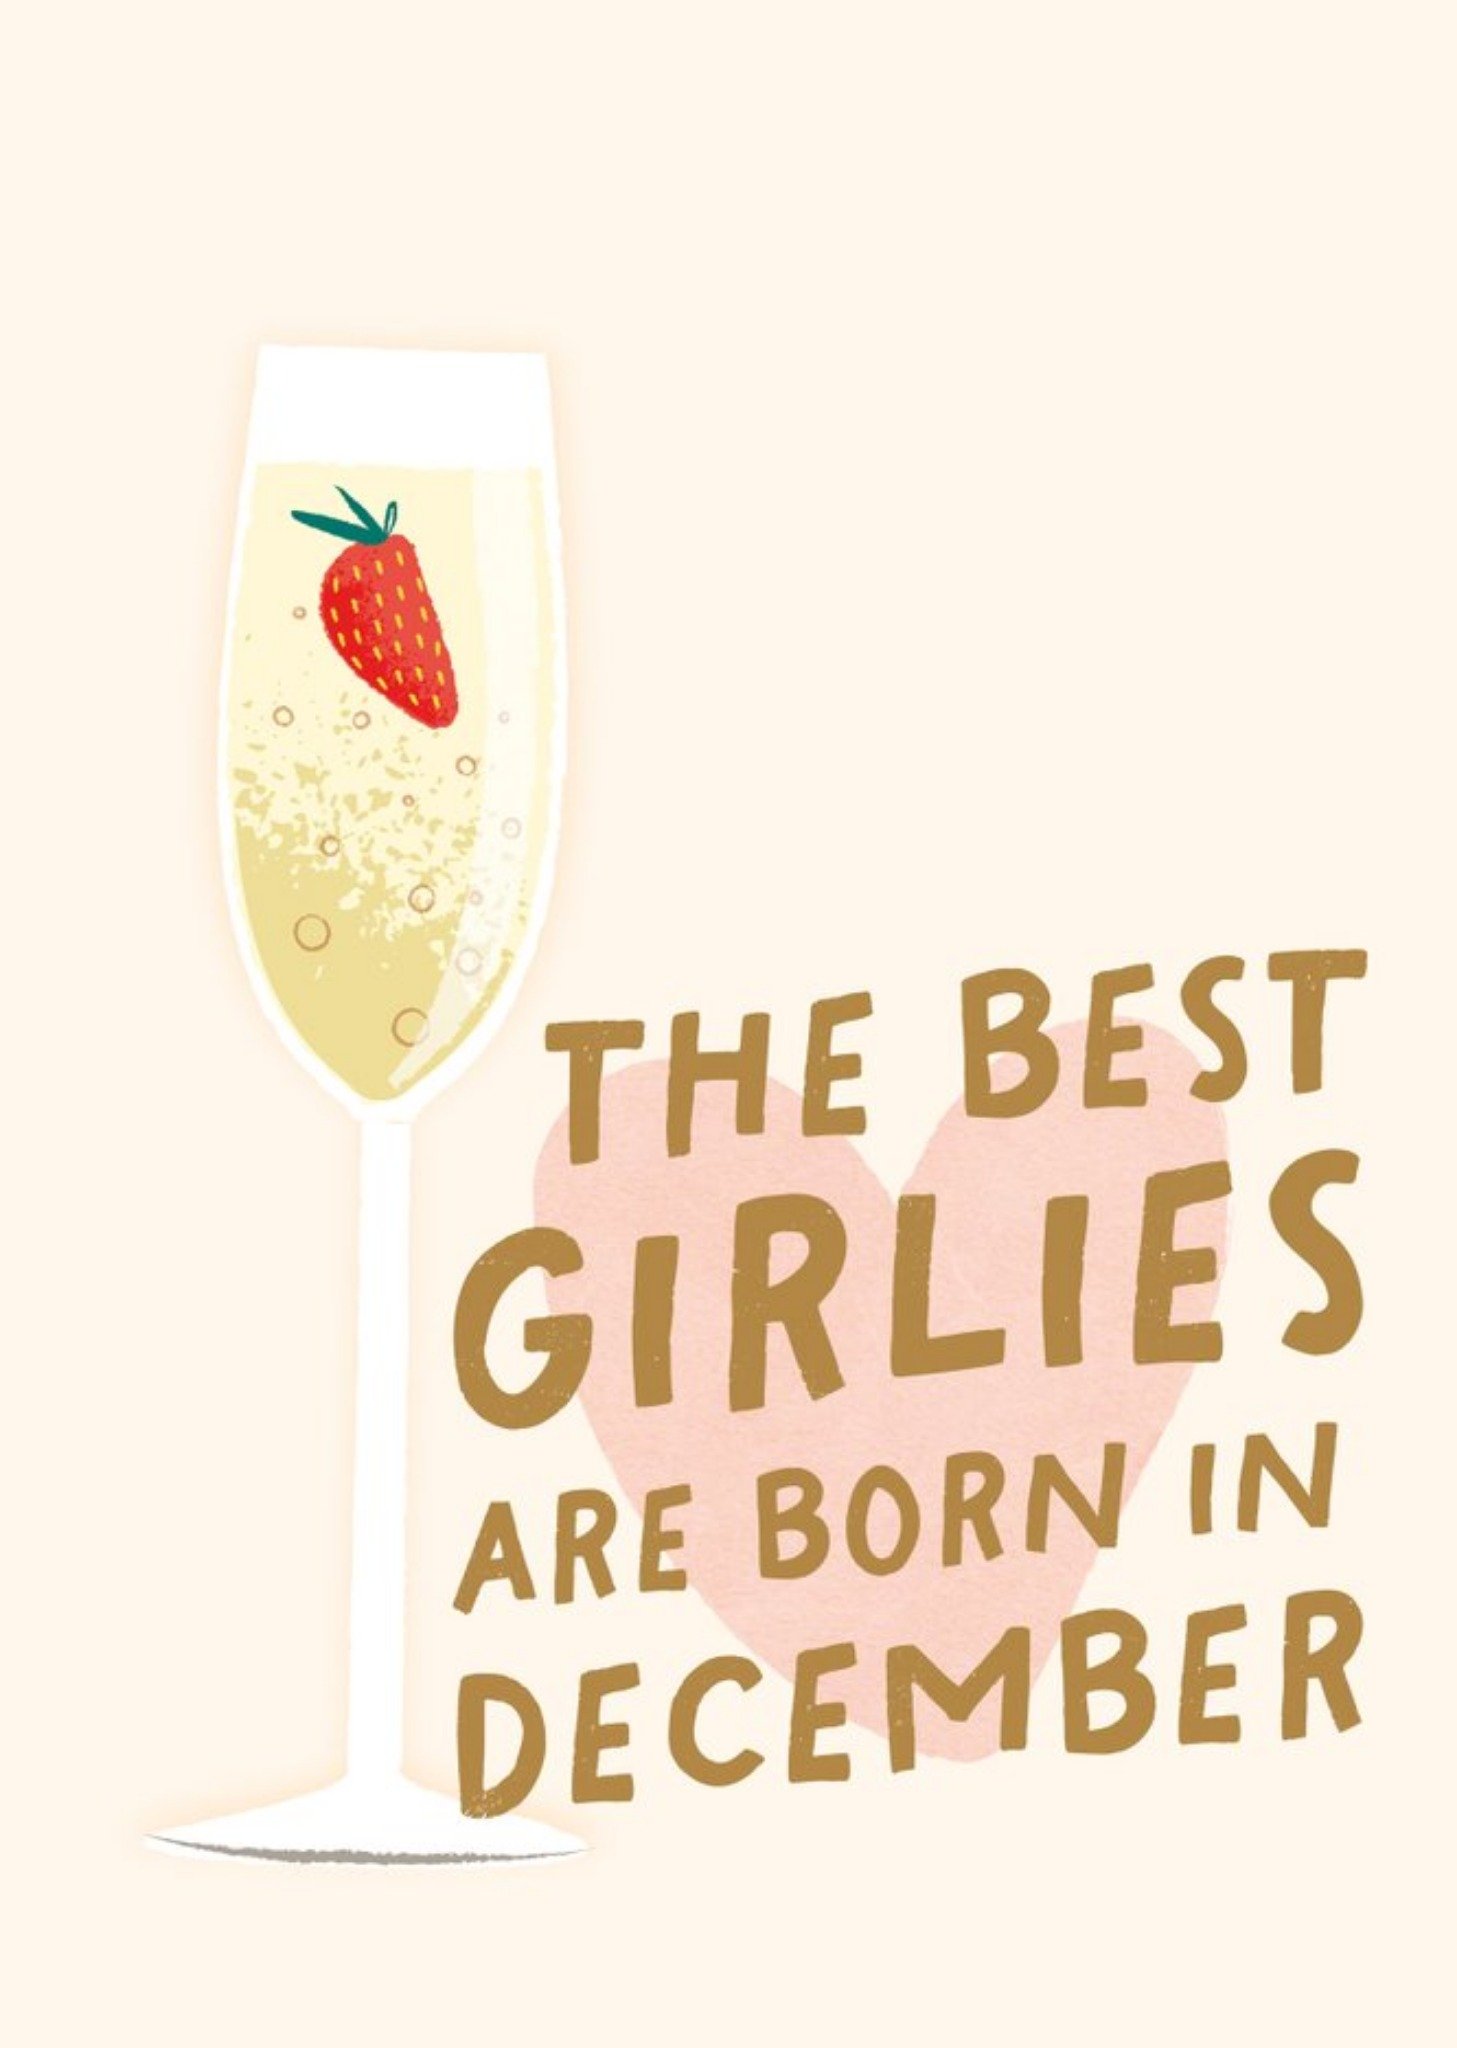 The London Studio Illustration Of A Glass Of Wine The Best Girlies Are Born In December Birthday Car